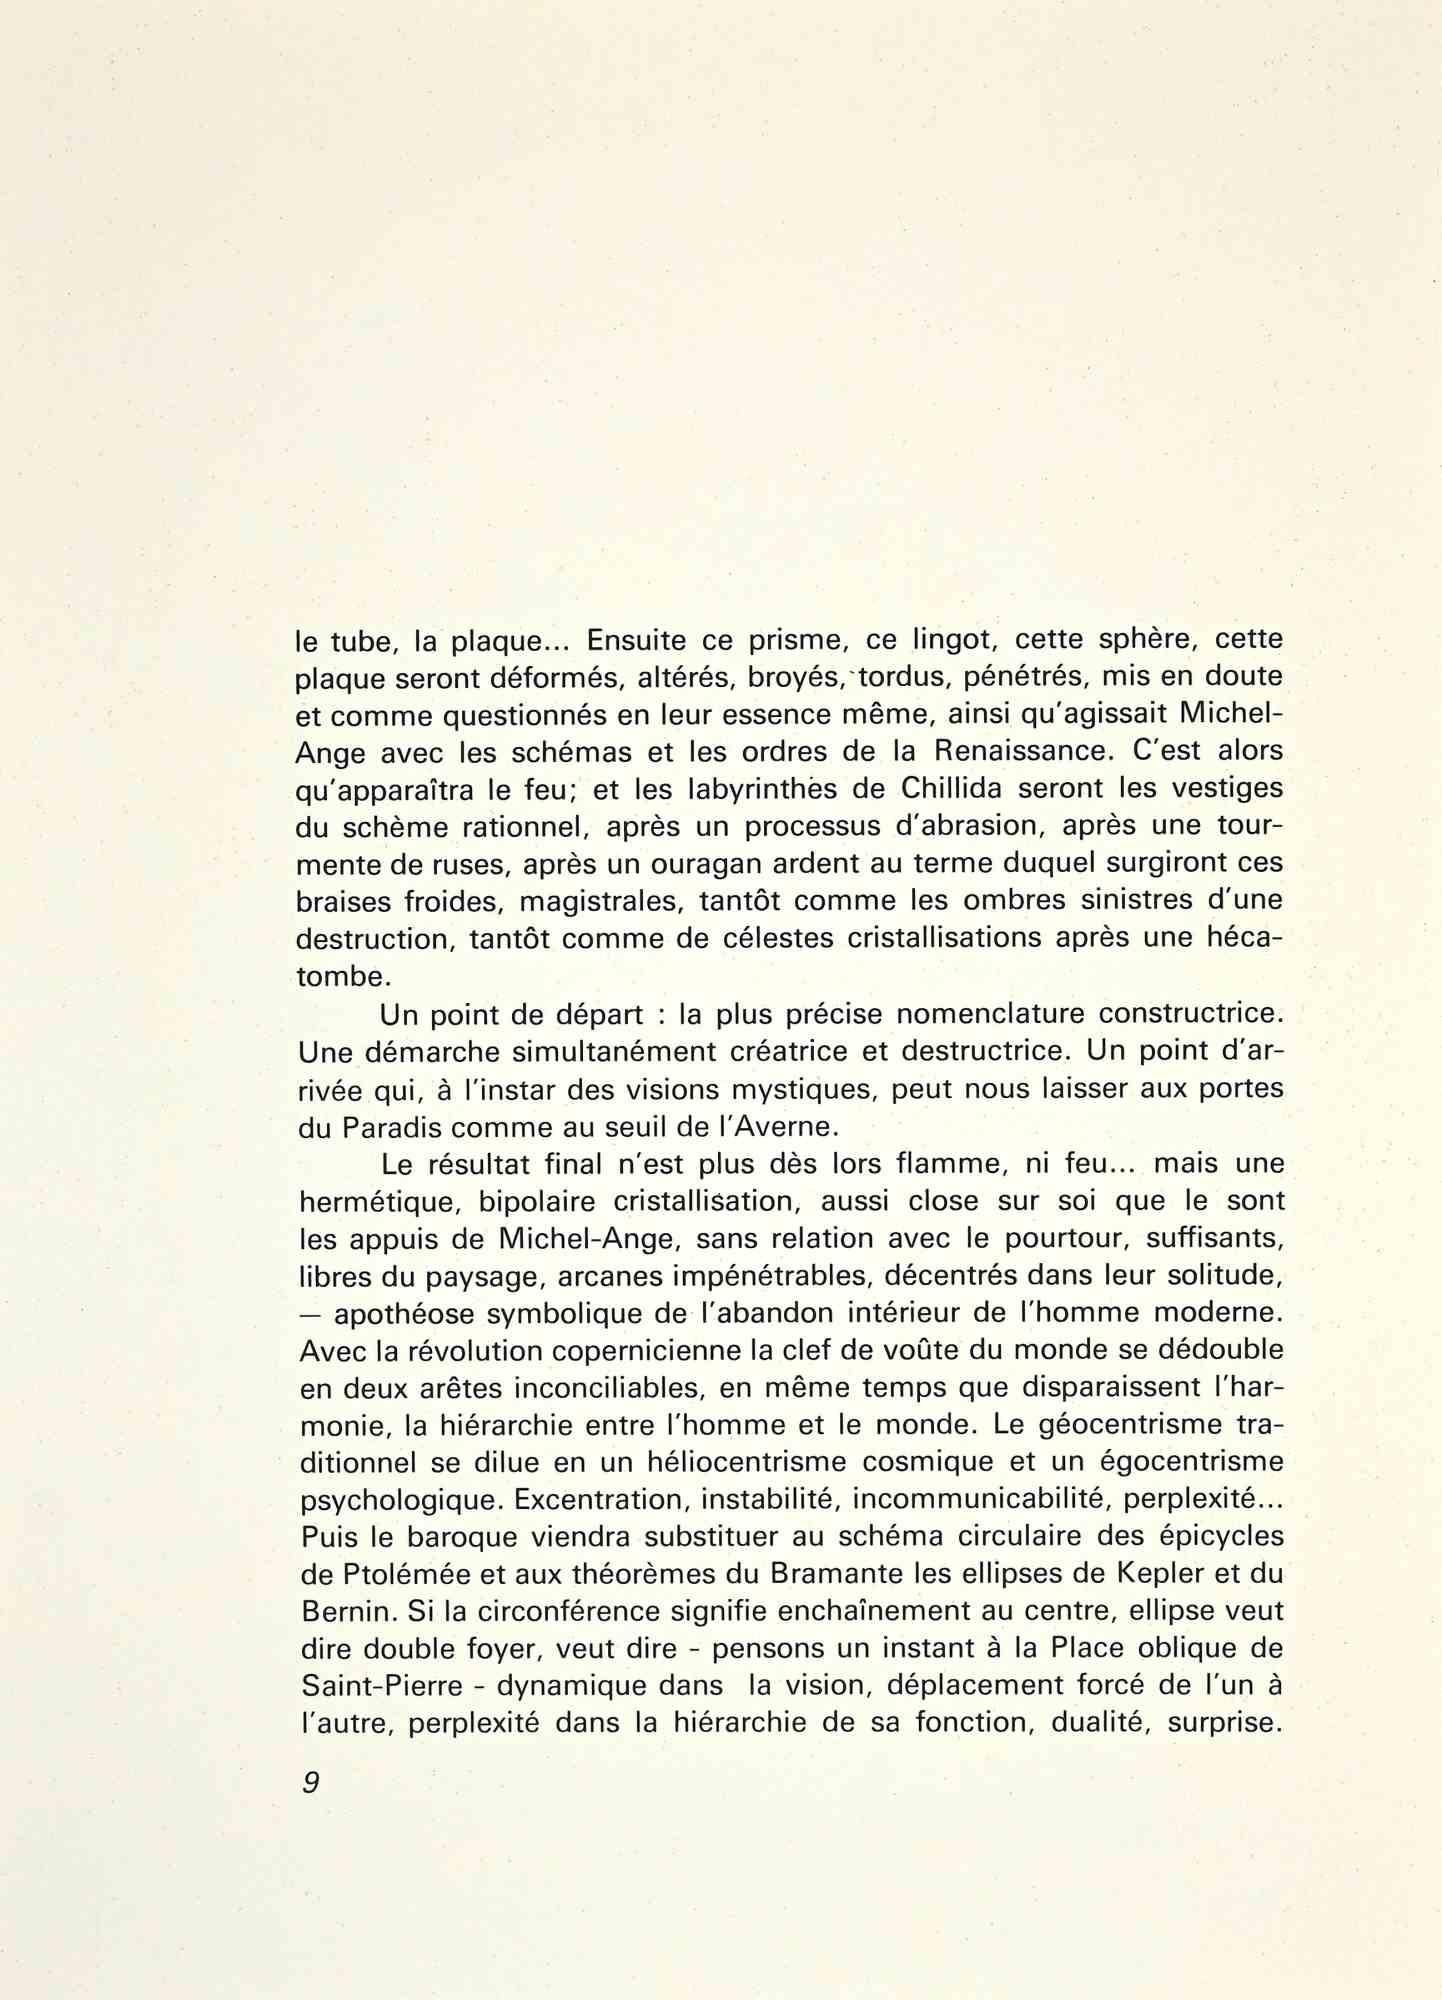 Composition from Derriere Le Miroir is an original lithograph artwork realized by Eduardo Chillida in 1968.

Printed by Editor Ateliers de Maeght, Paris, 1968.

Very Good conditions.